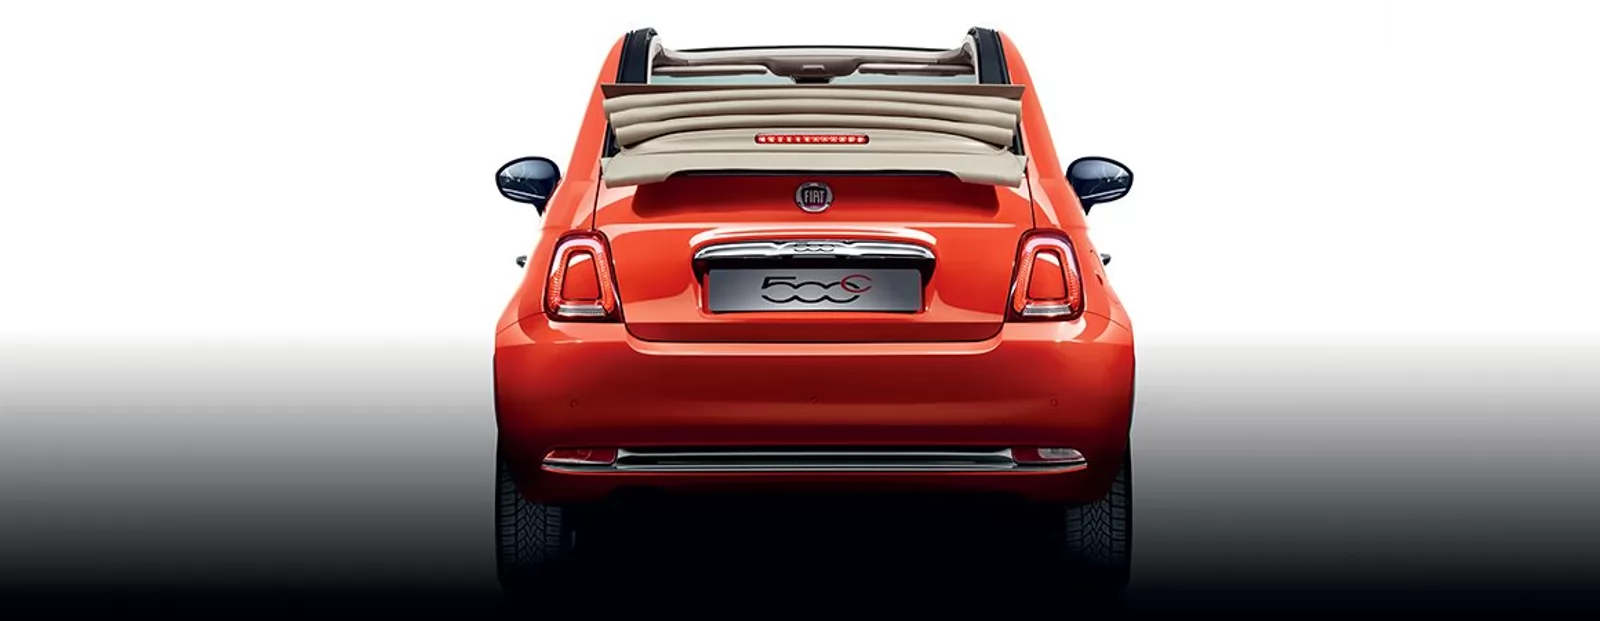 Lateral Fiat 500C